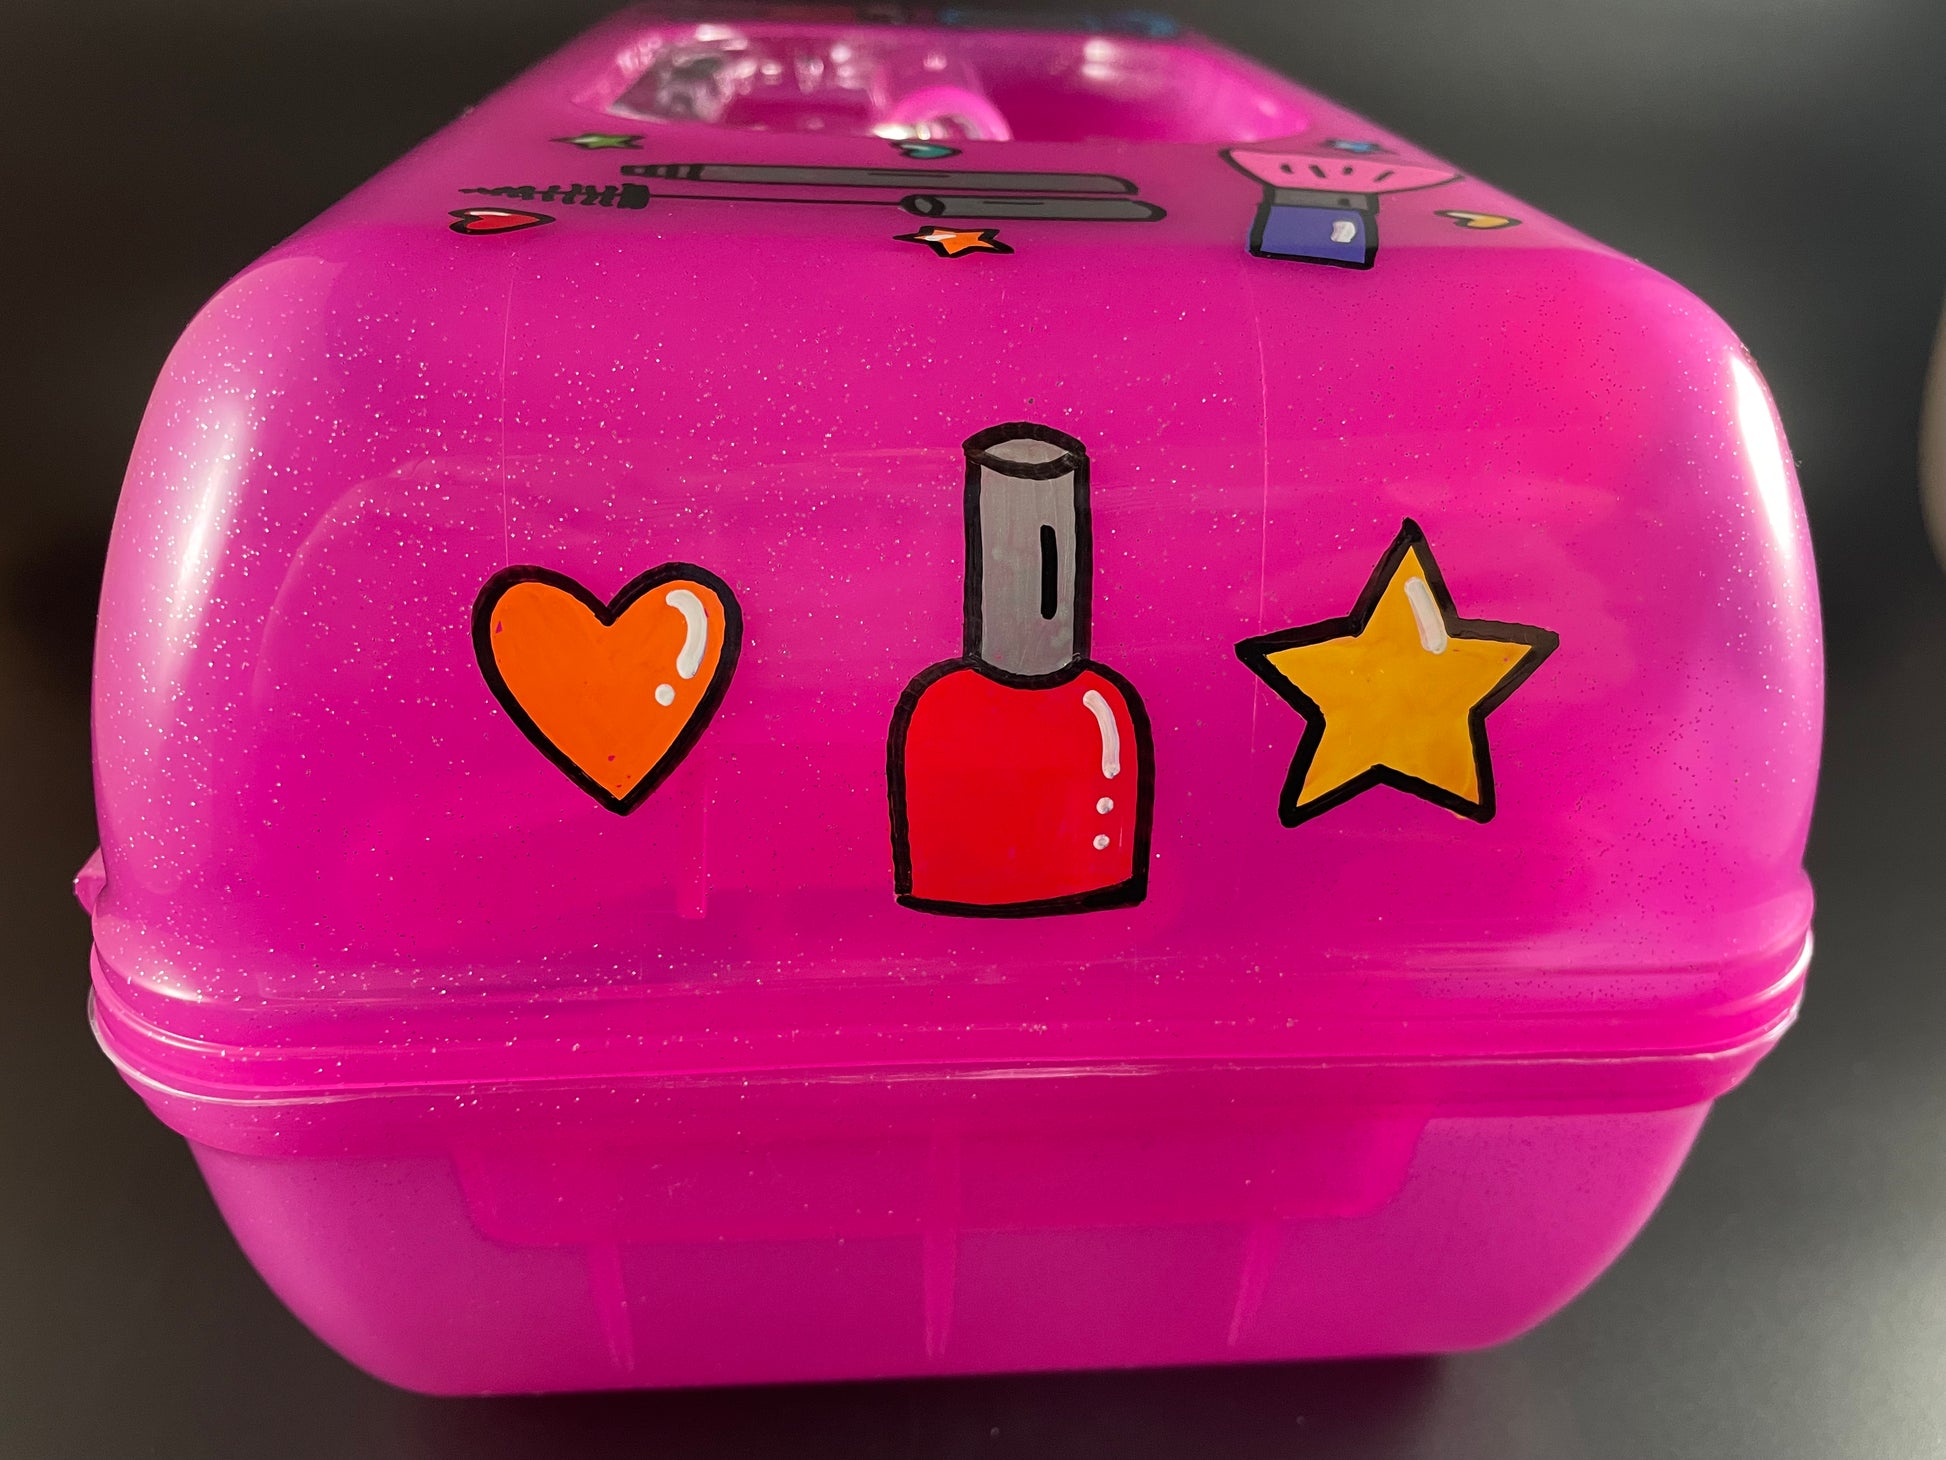 Caboodles On-The-Go Girl Makeup Box, Deep Pink Sparkle 